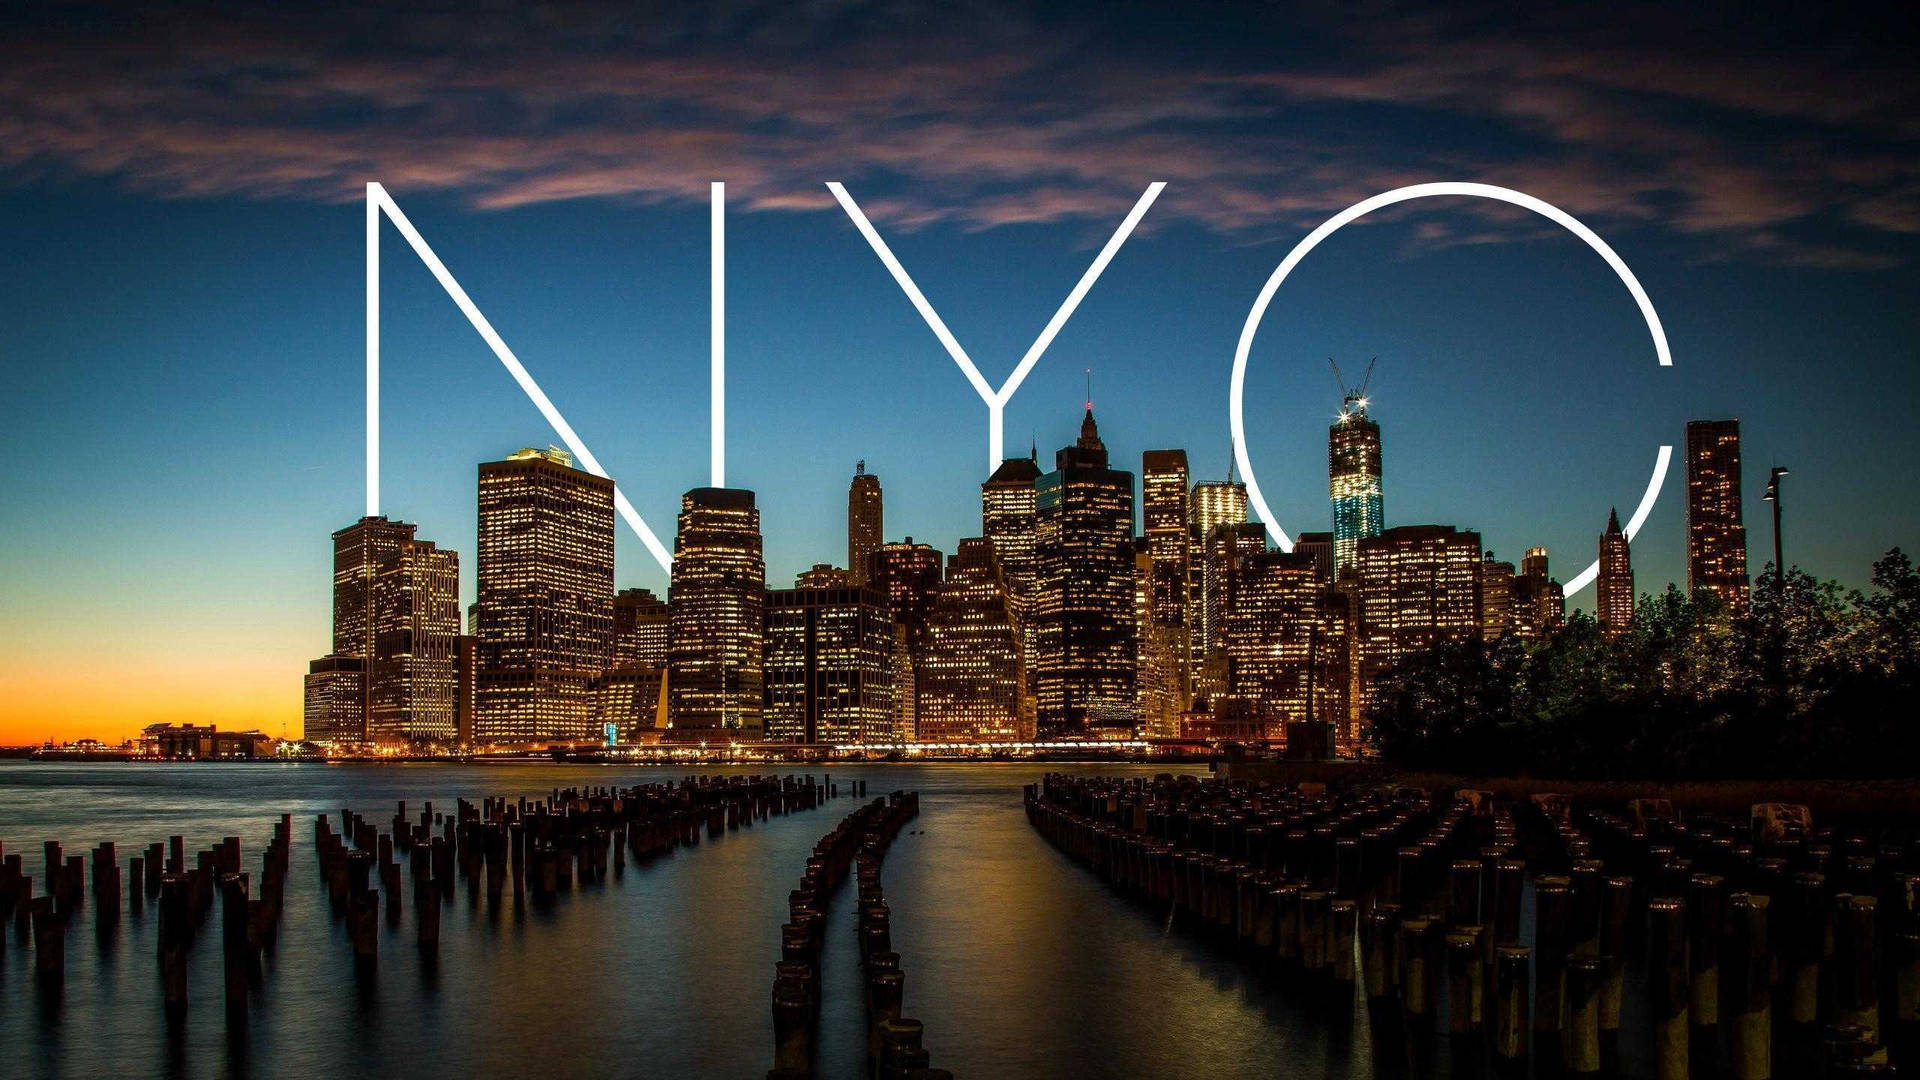 1920x1080 Download New York City With Nyc Text Wallpaper